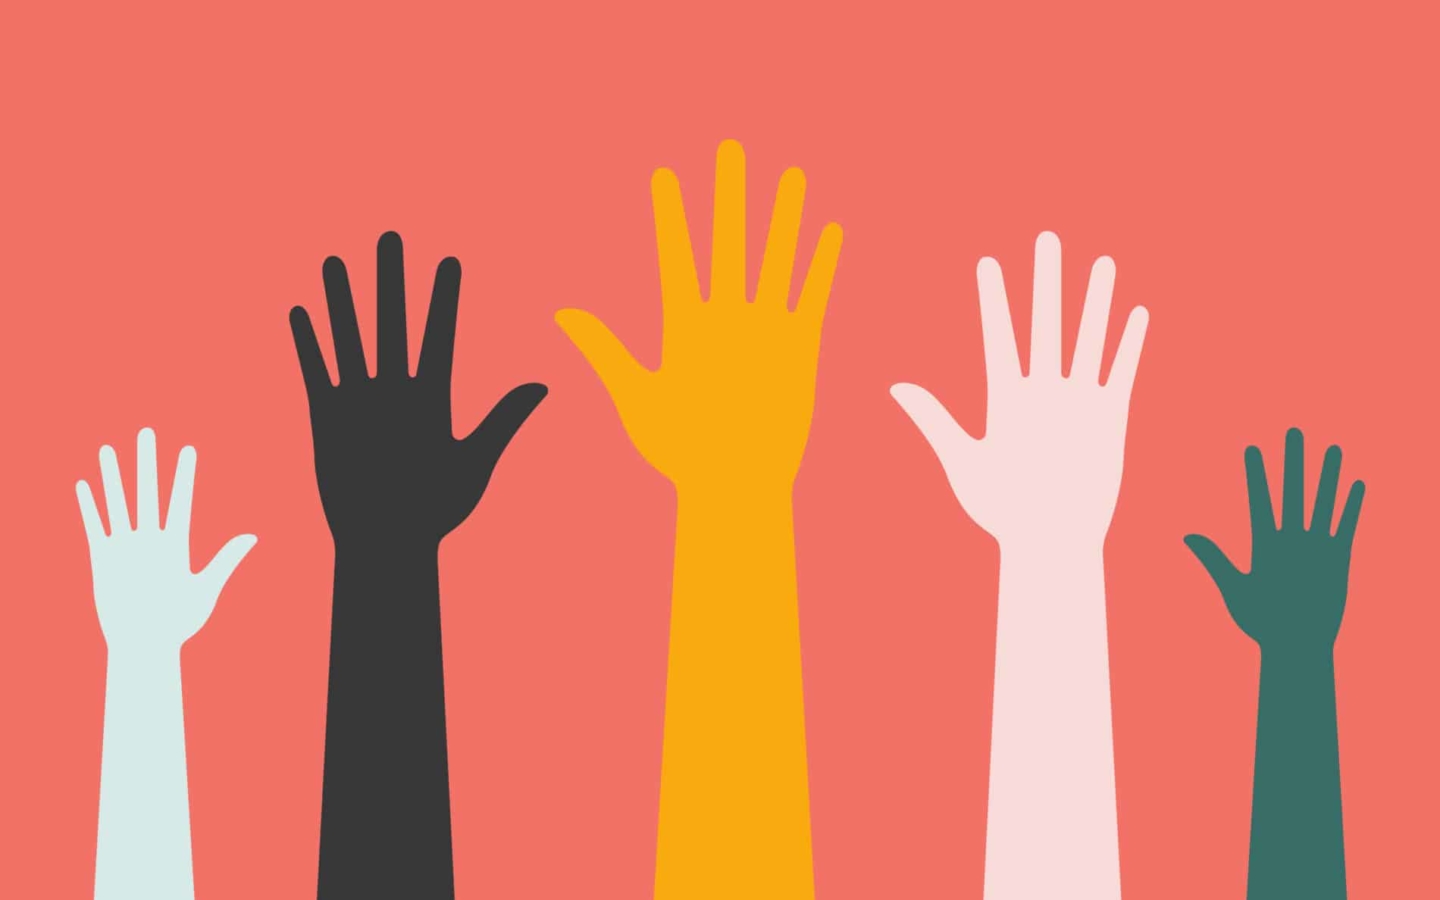 Five raised hands to signify inclusion.